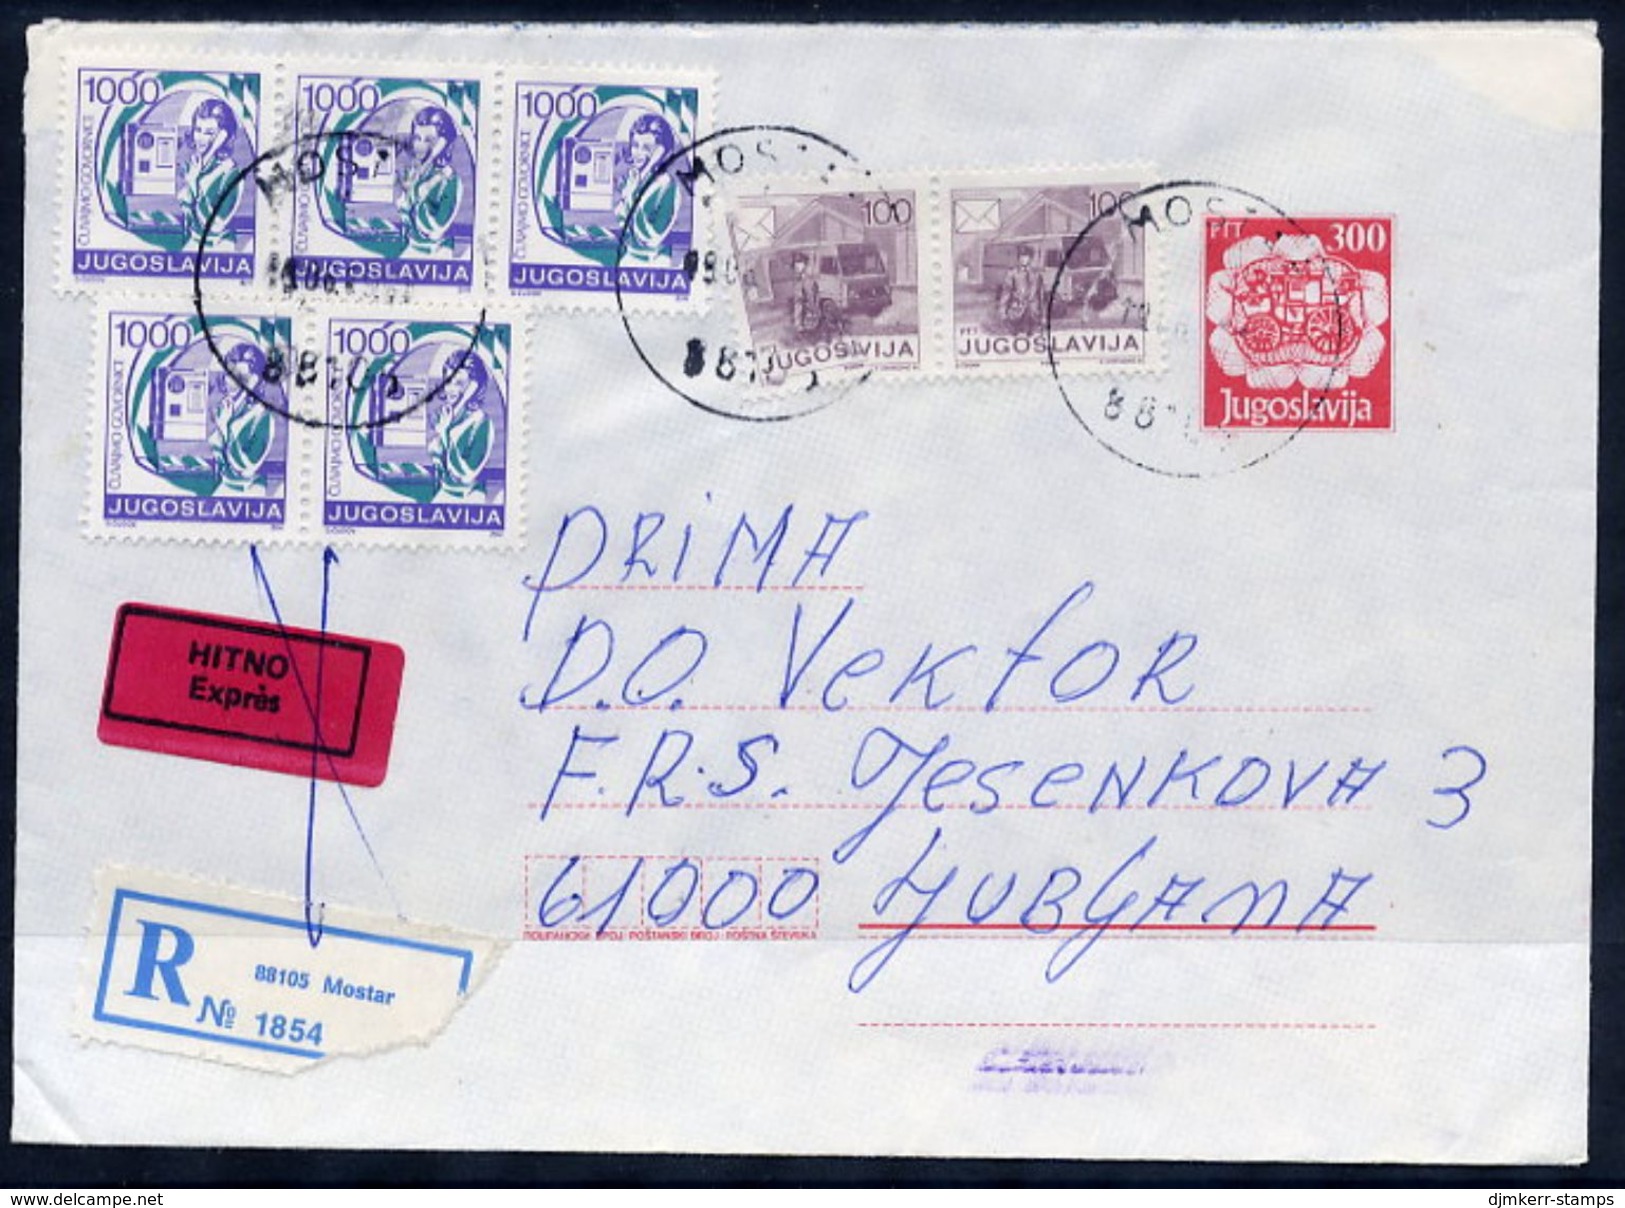 YUGOSLAVIA 1989 Mailcoach 300 D.envelope Used With Additional Franking And Express Label (Croatian).  Michel U89 - Interi Postali